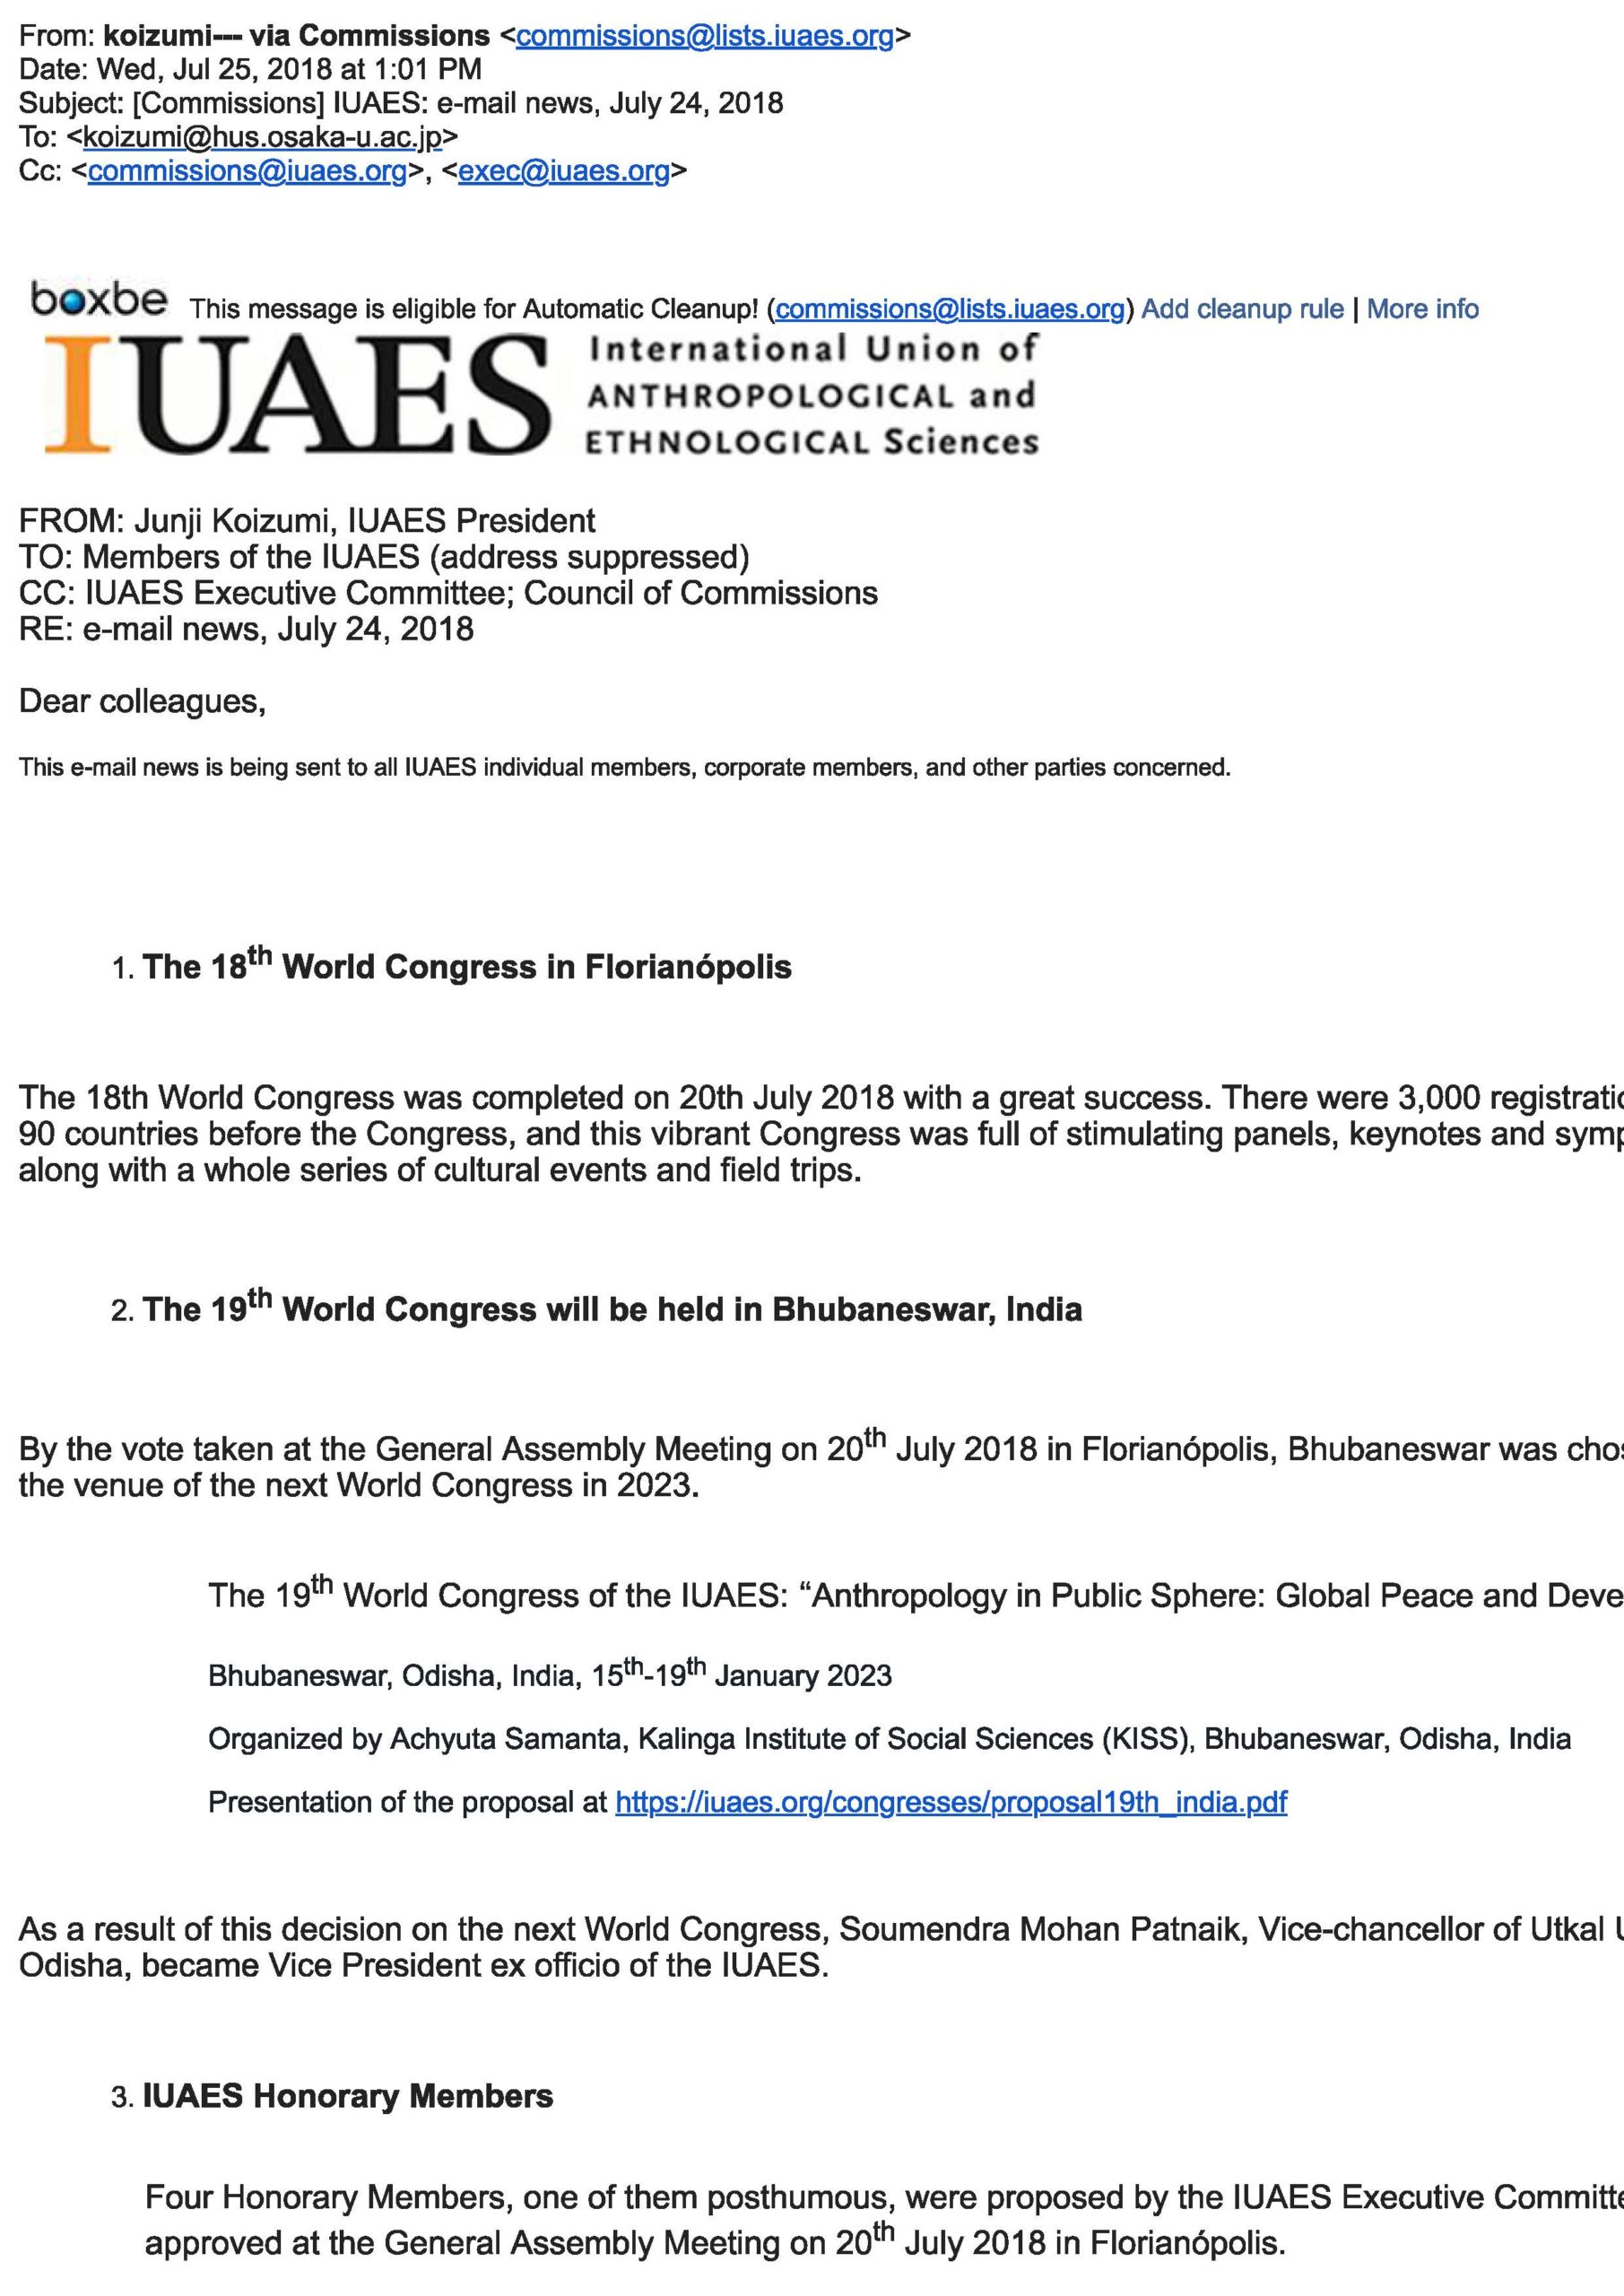 General Body Resolution of IUAES